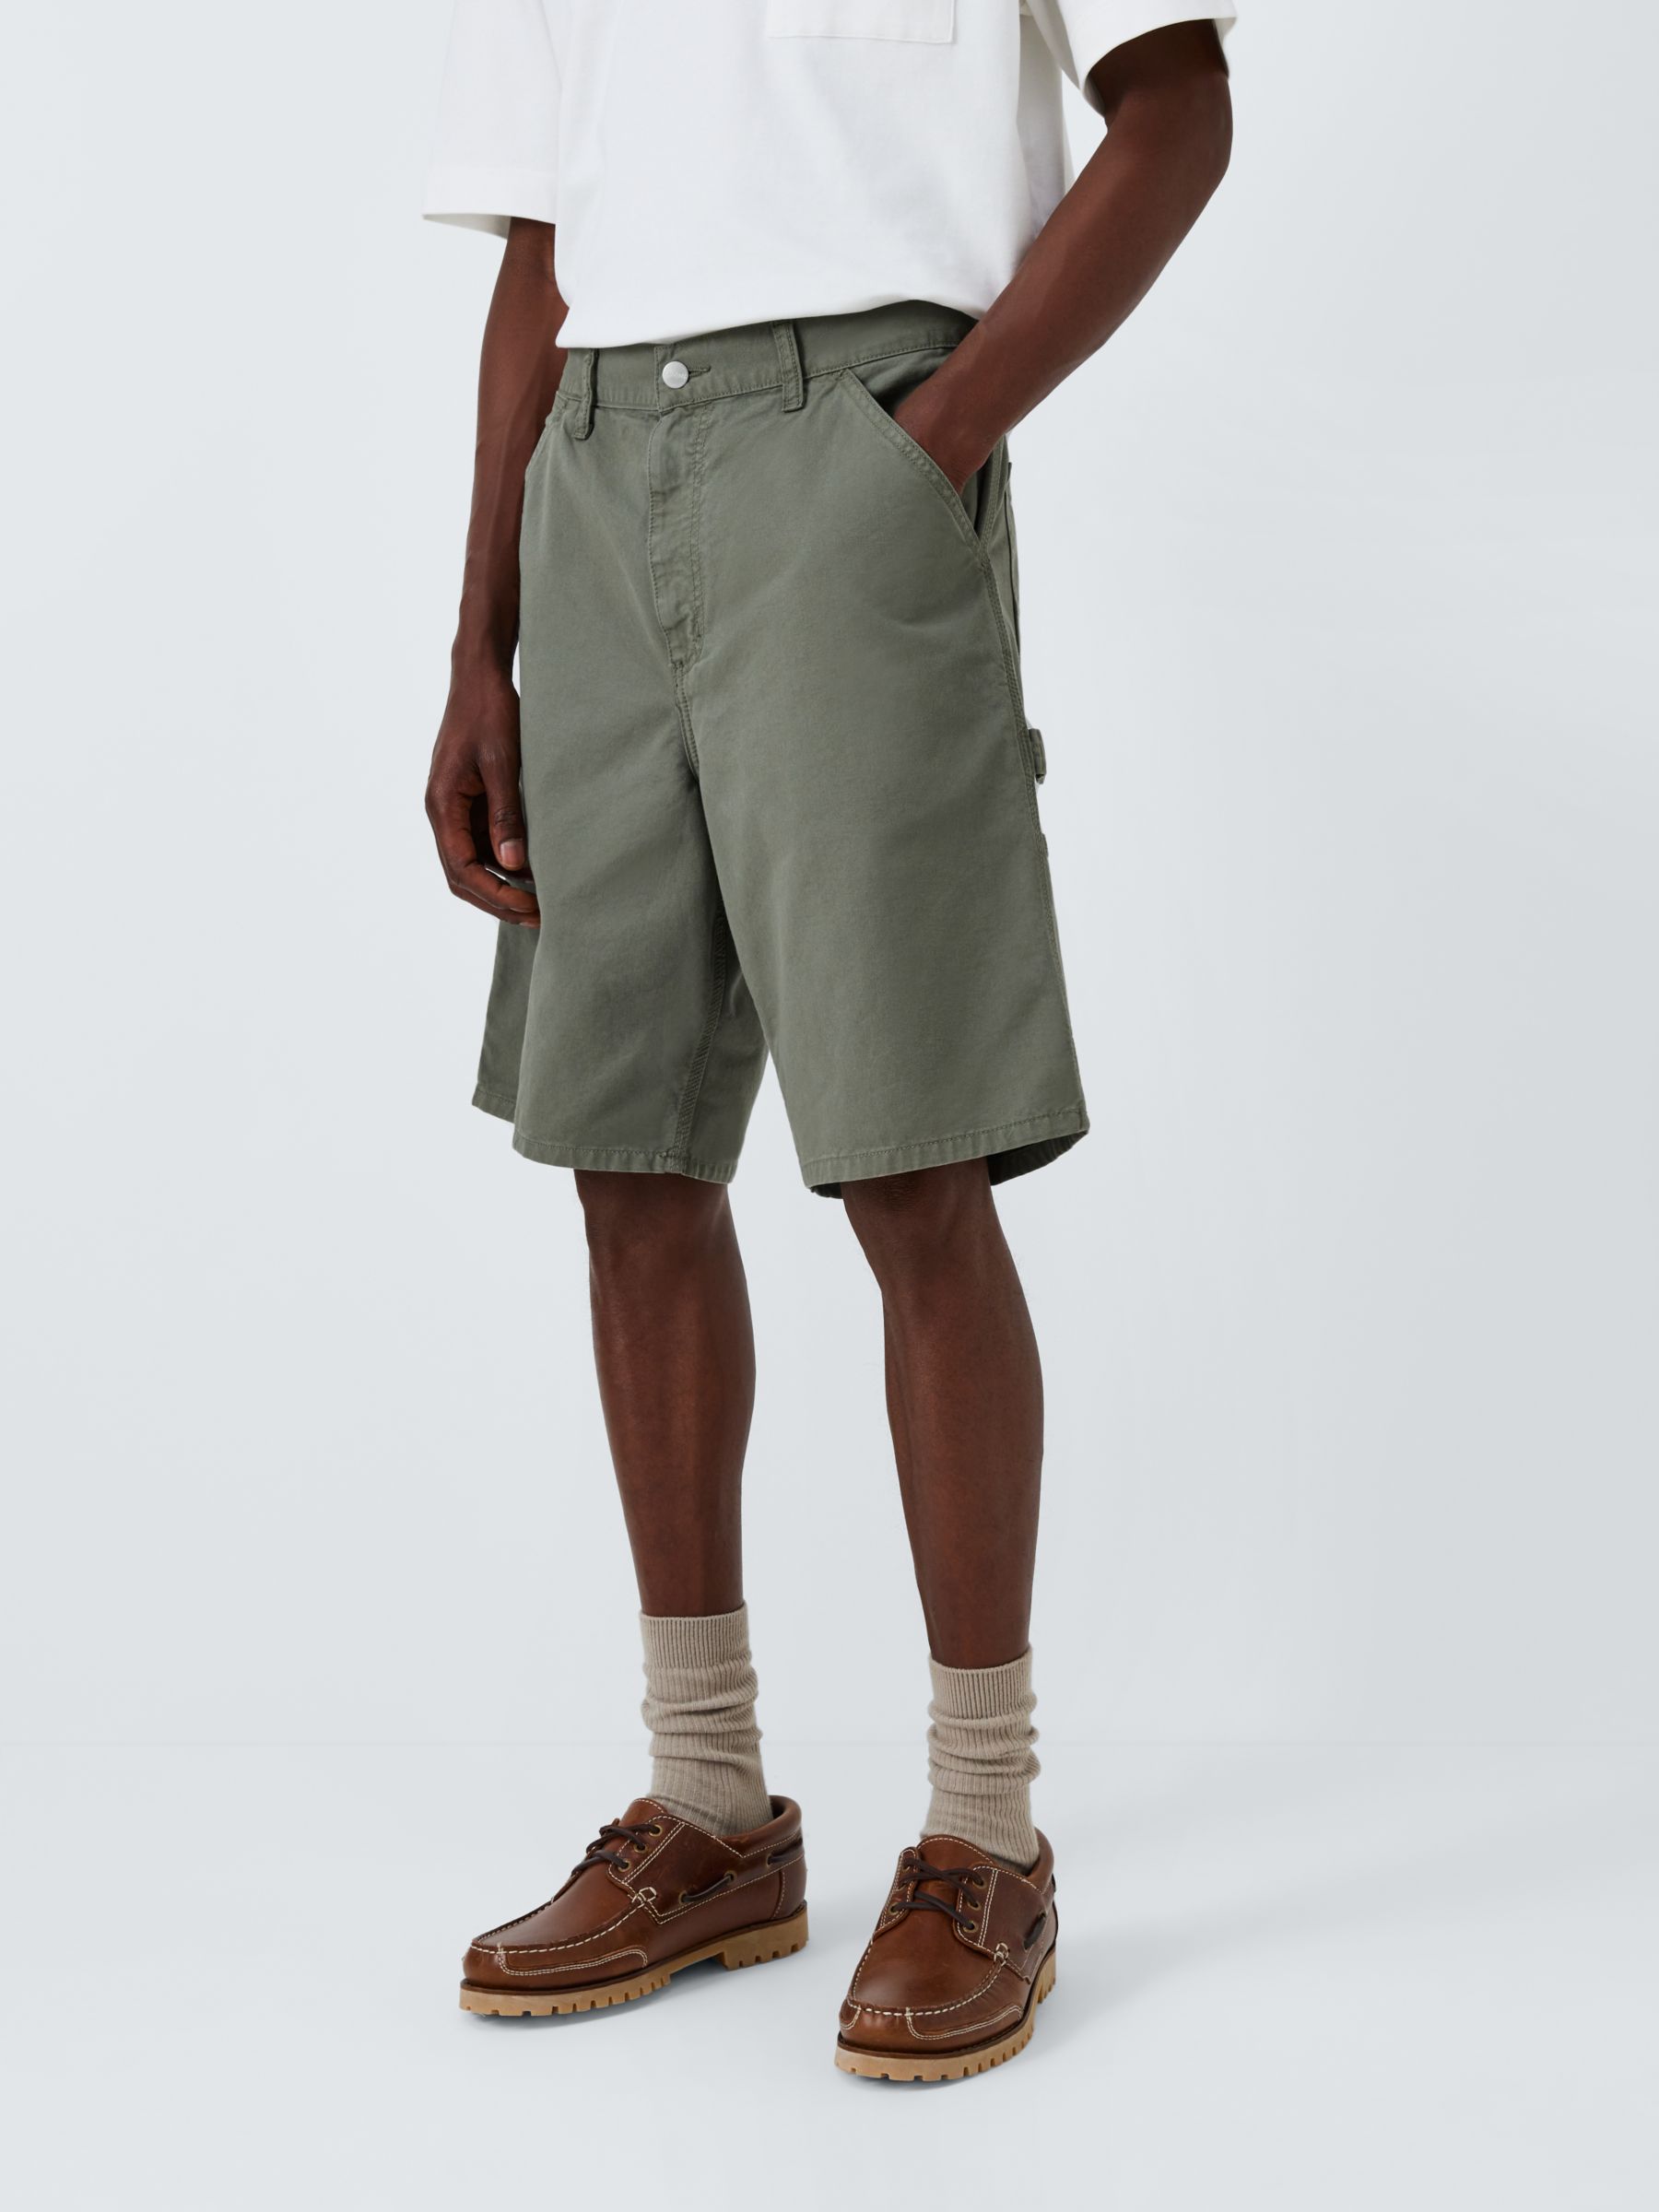 Buy Carhartt WIP Single Knee Relaxed Fit Shorts, Park Online at johnlewis.com